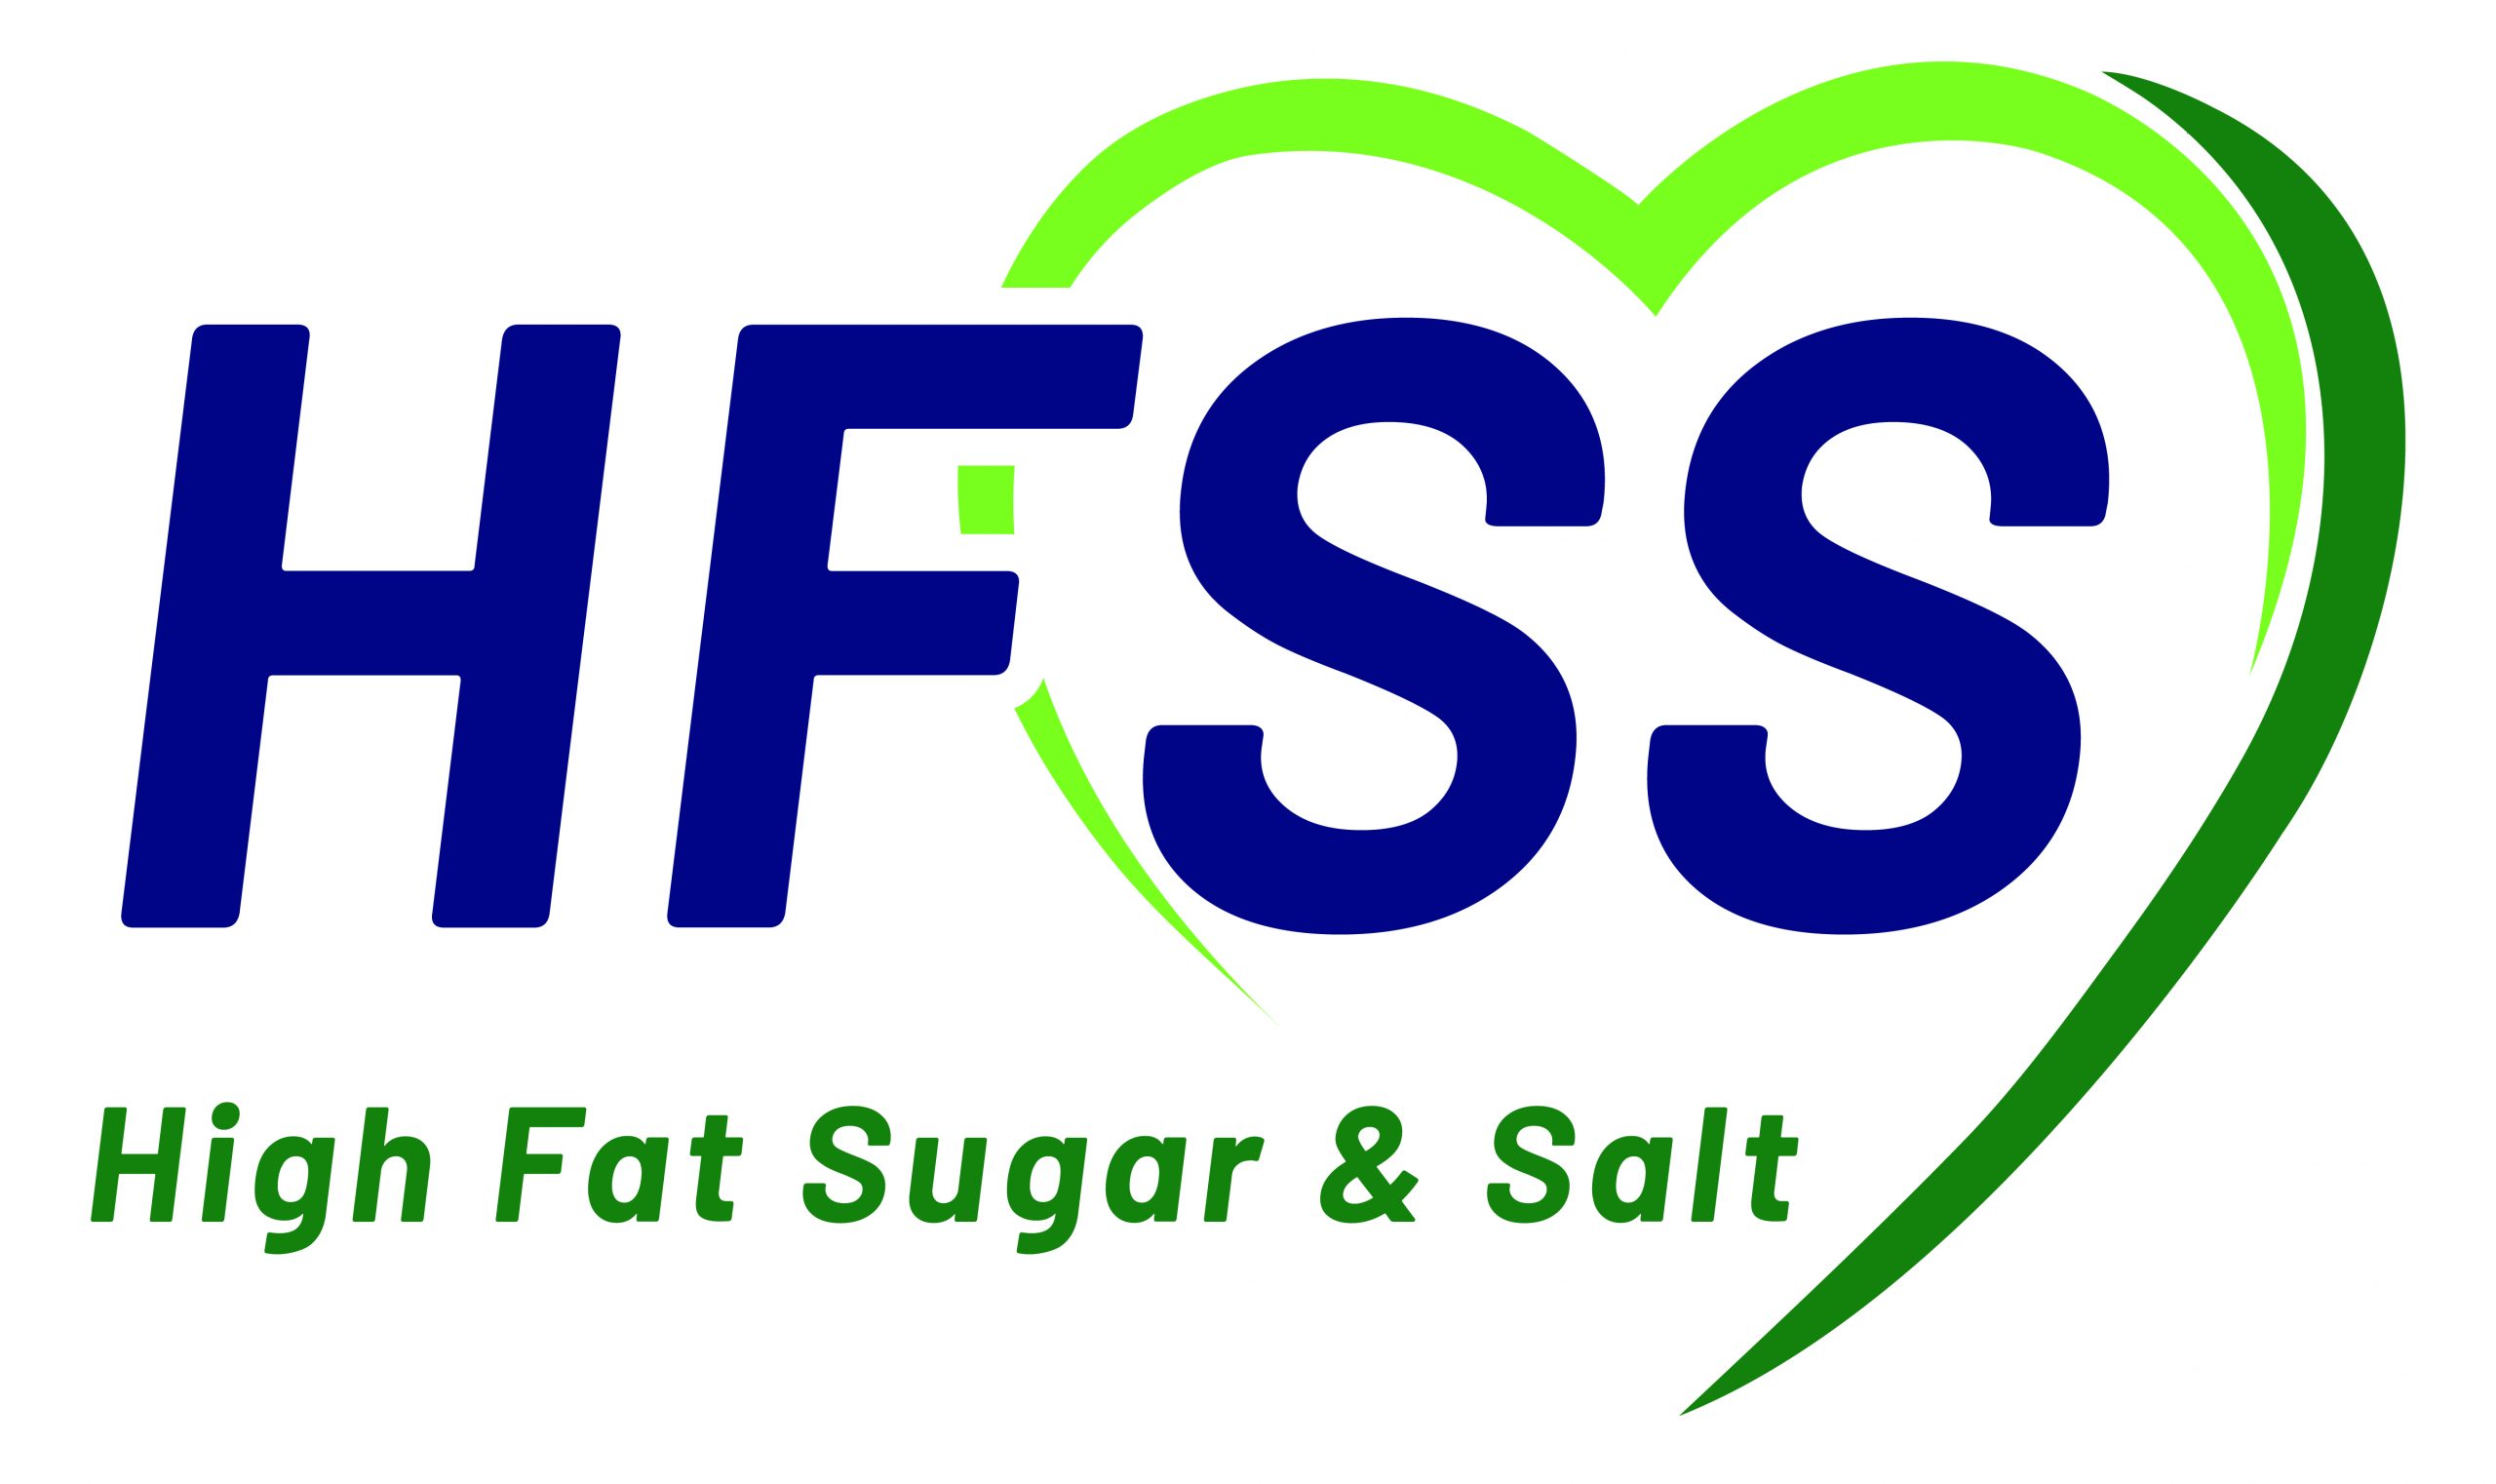 Plan for Profit to launch new HFSS product-check tool